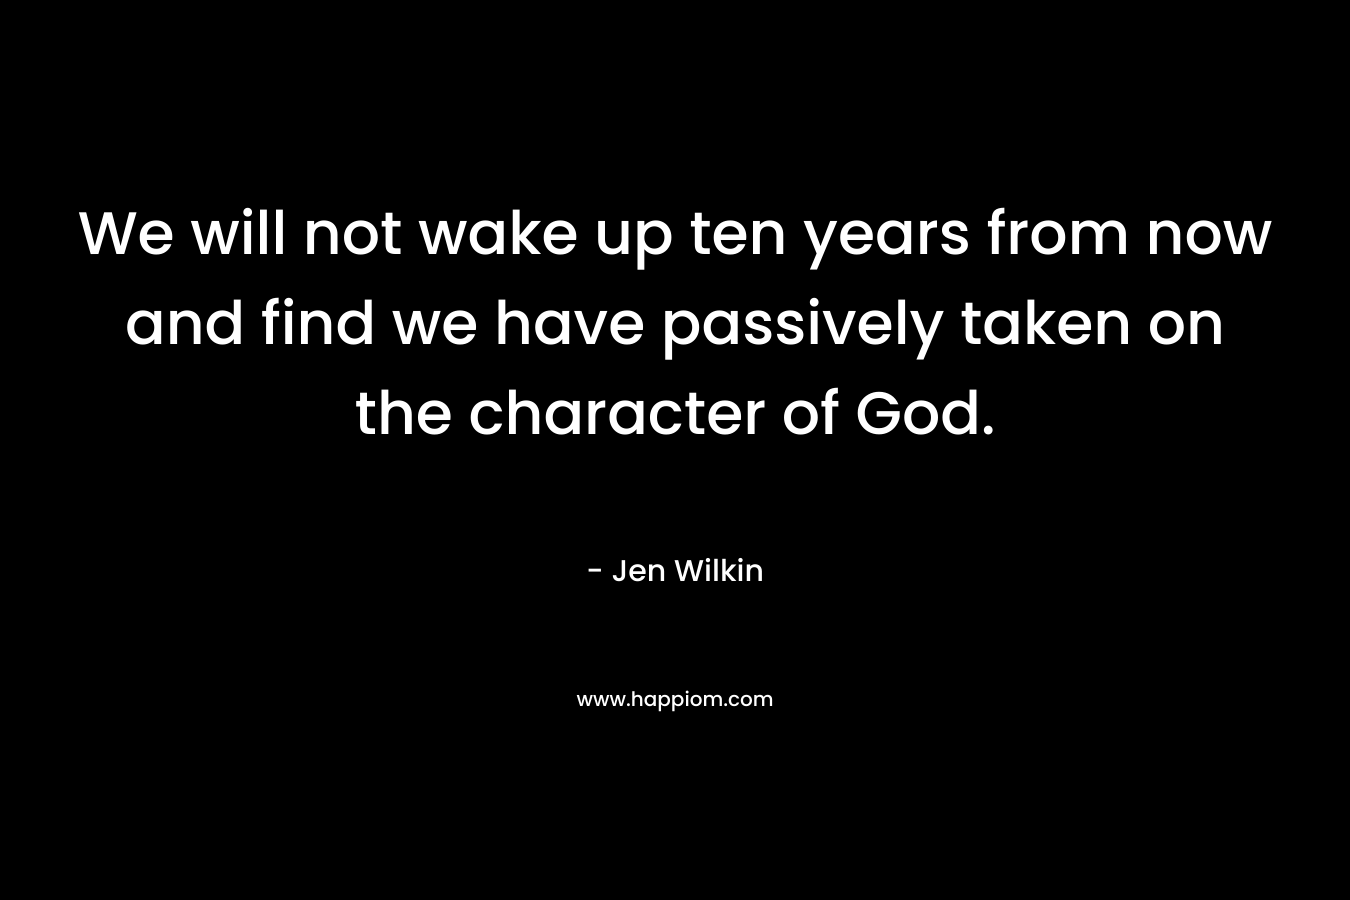 We will not wake up ten years from now and find we have passively taken on the character of God.